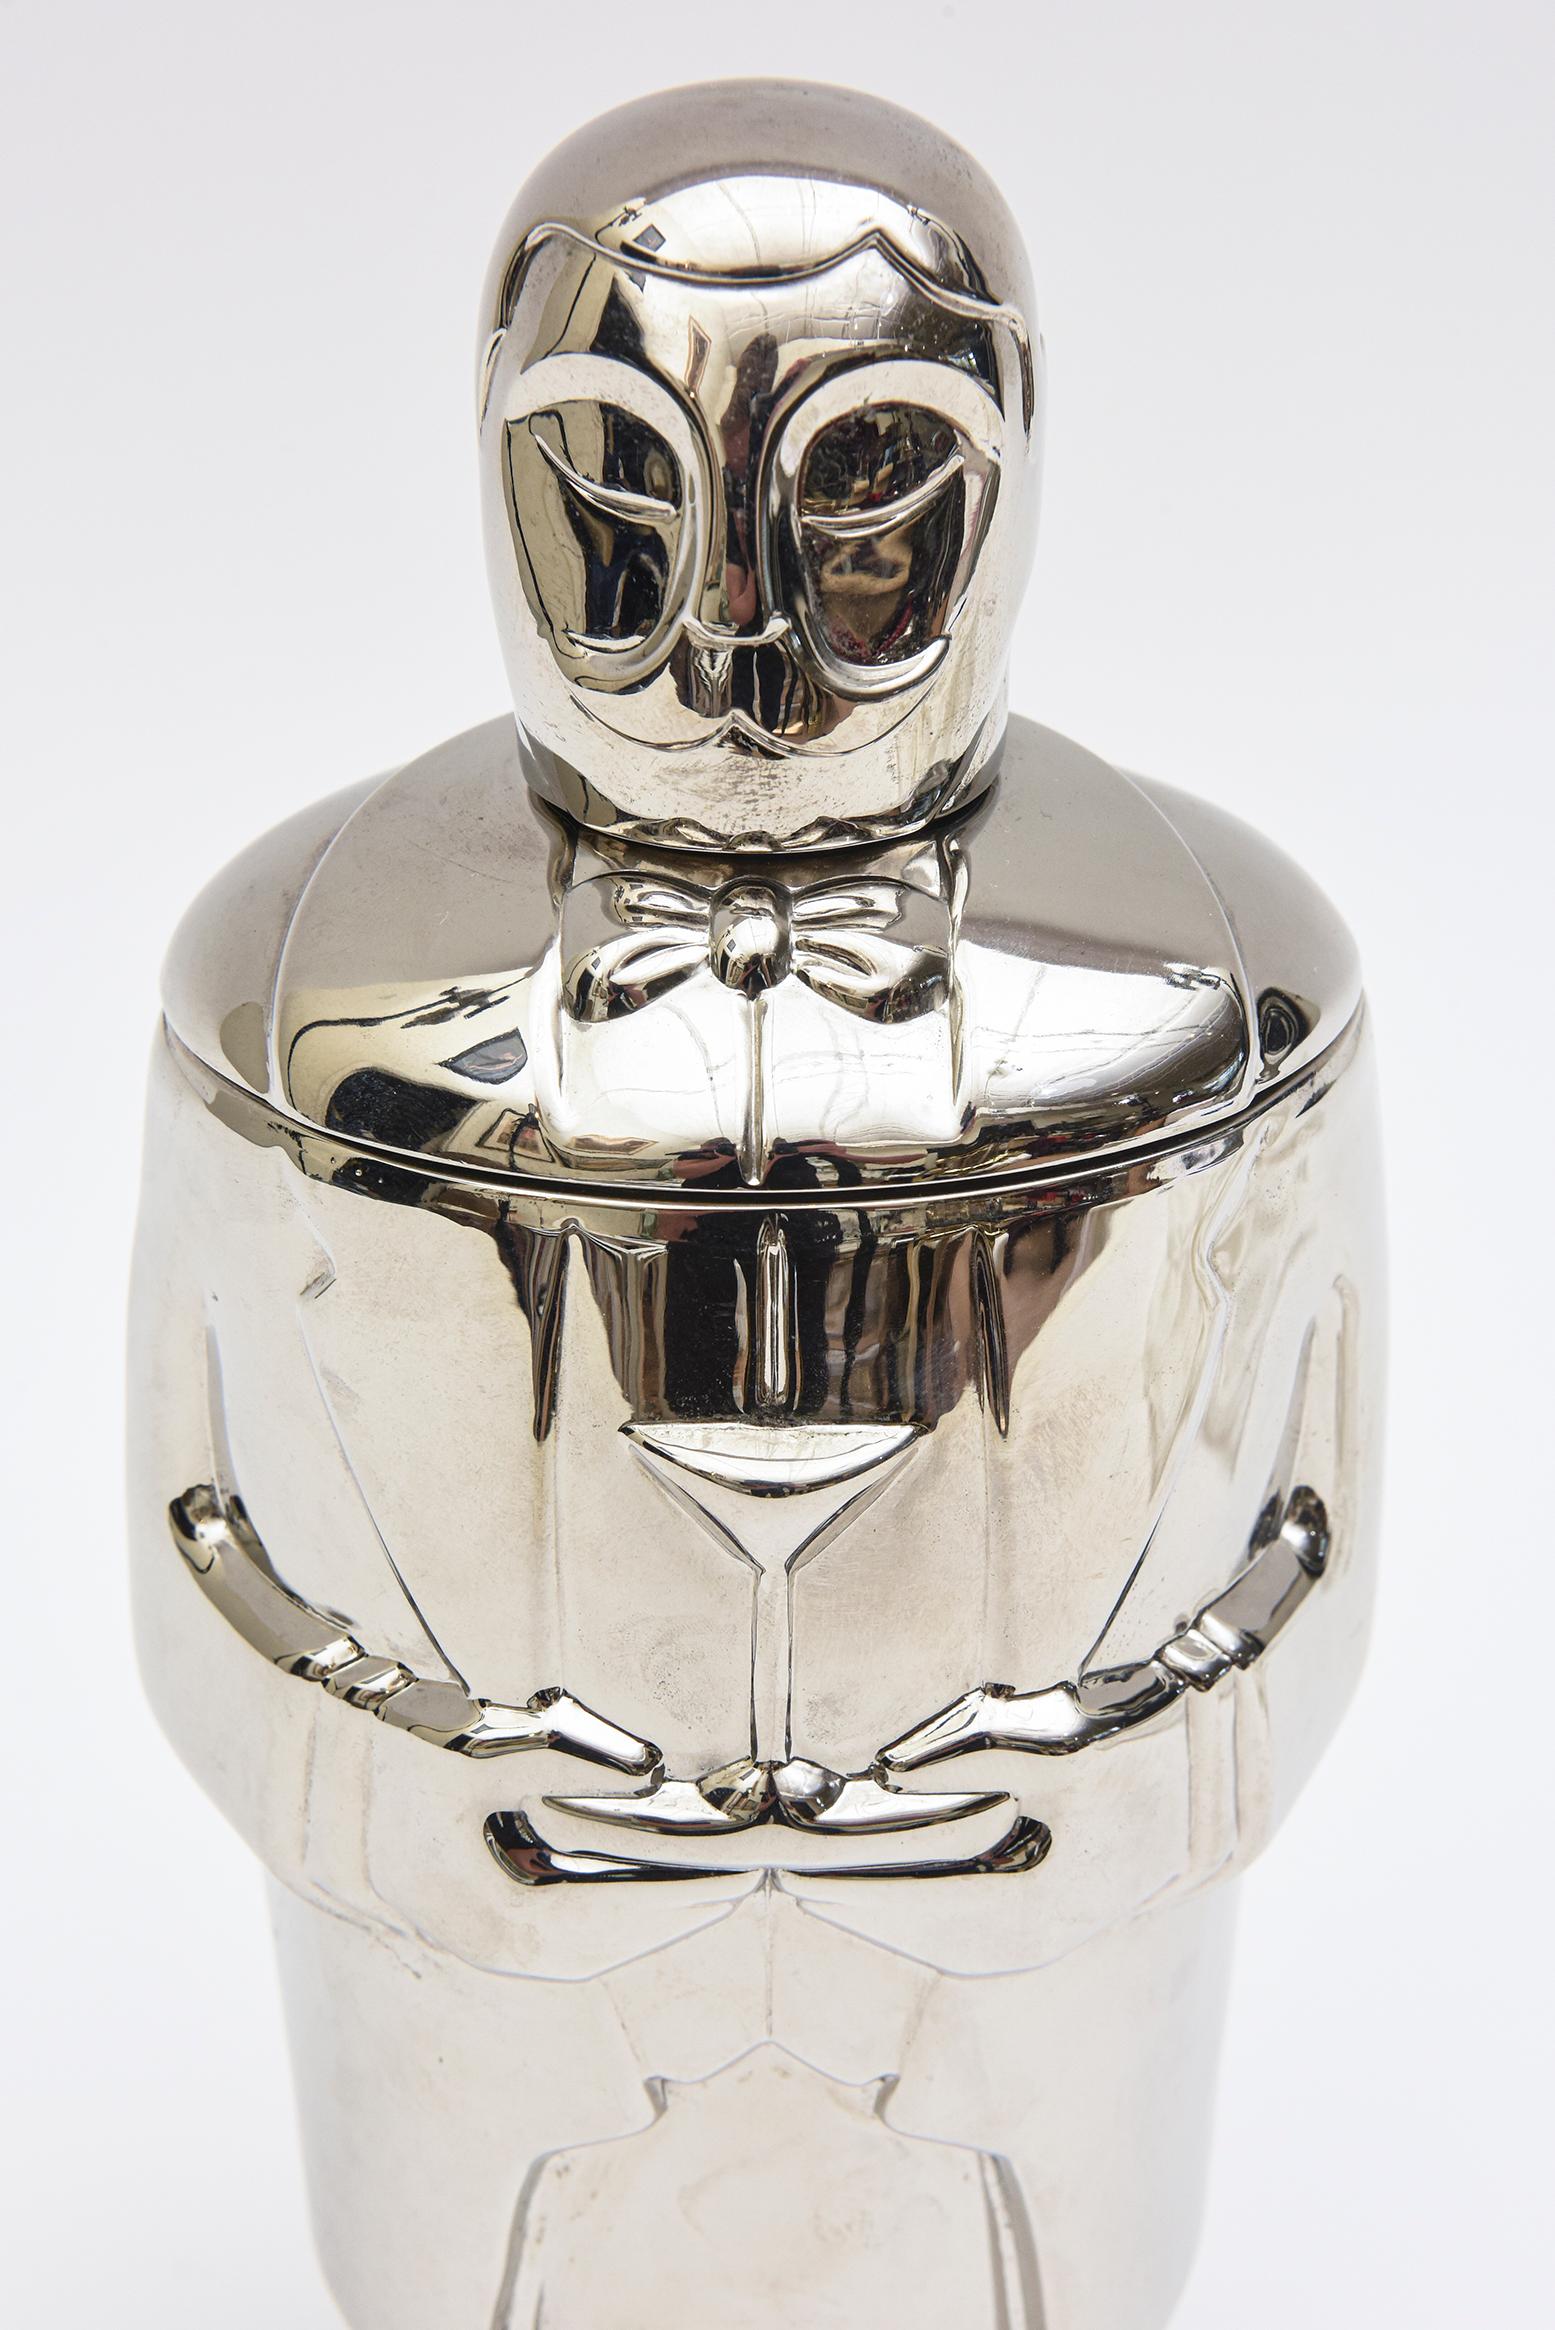 This delightful and whimsical chrome bartender martini shaker by Lenox is ready to mix your fabulous drinks. It is from the late 1990's and has an art deco inspired design. The all dressed up with bowtie bartender is holding the martini shaker close